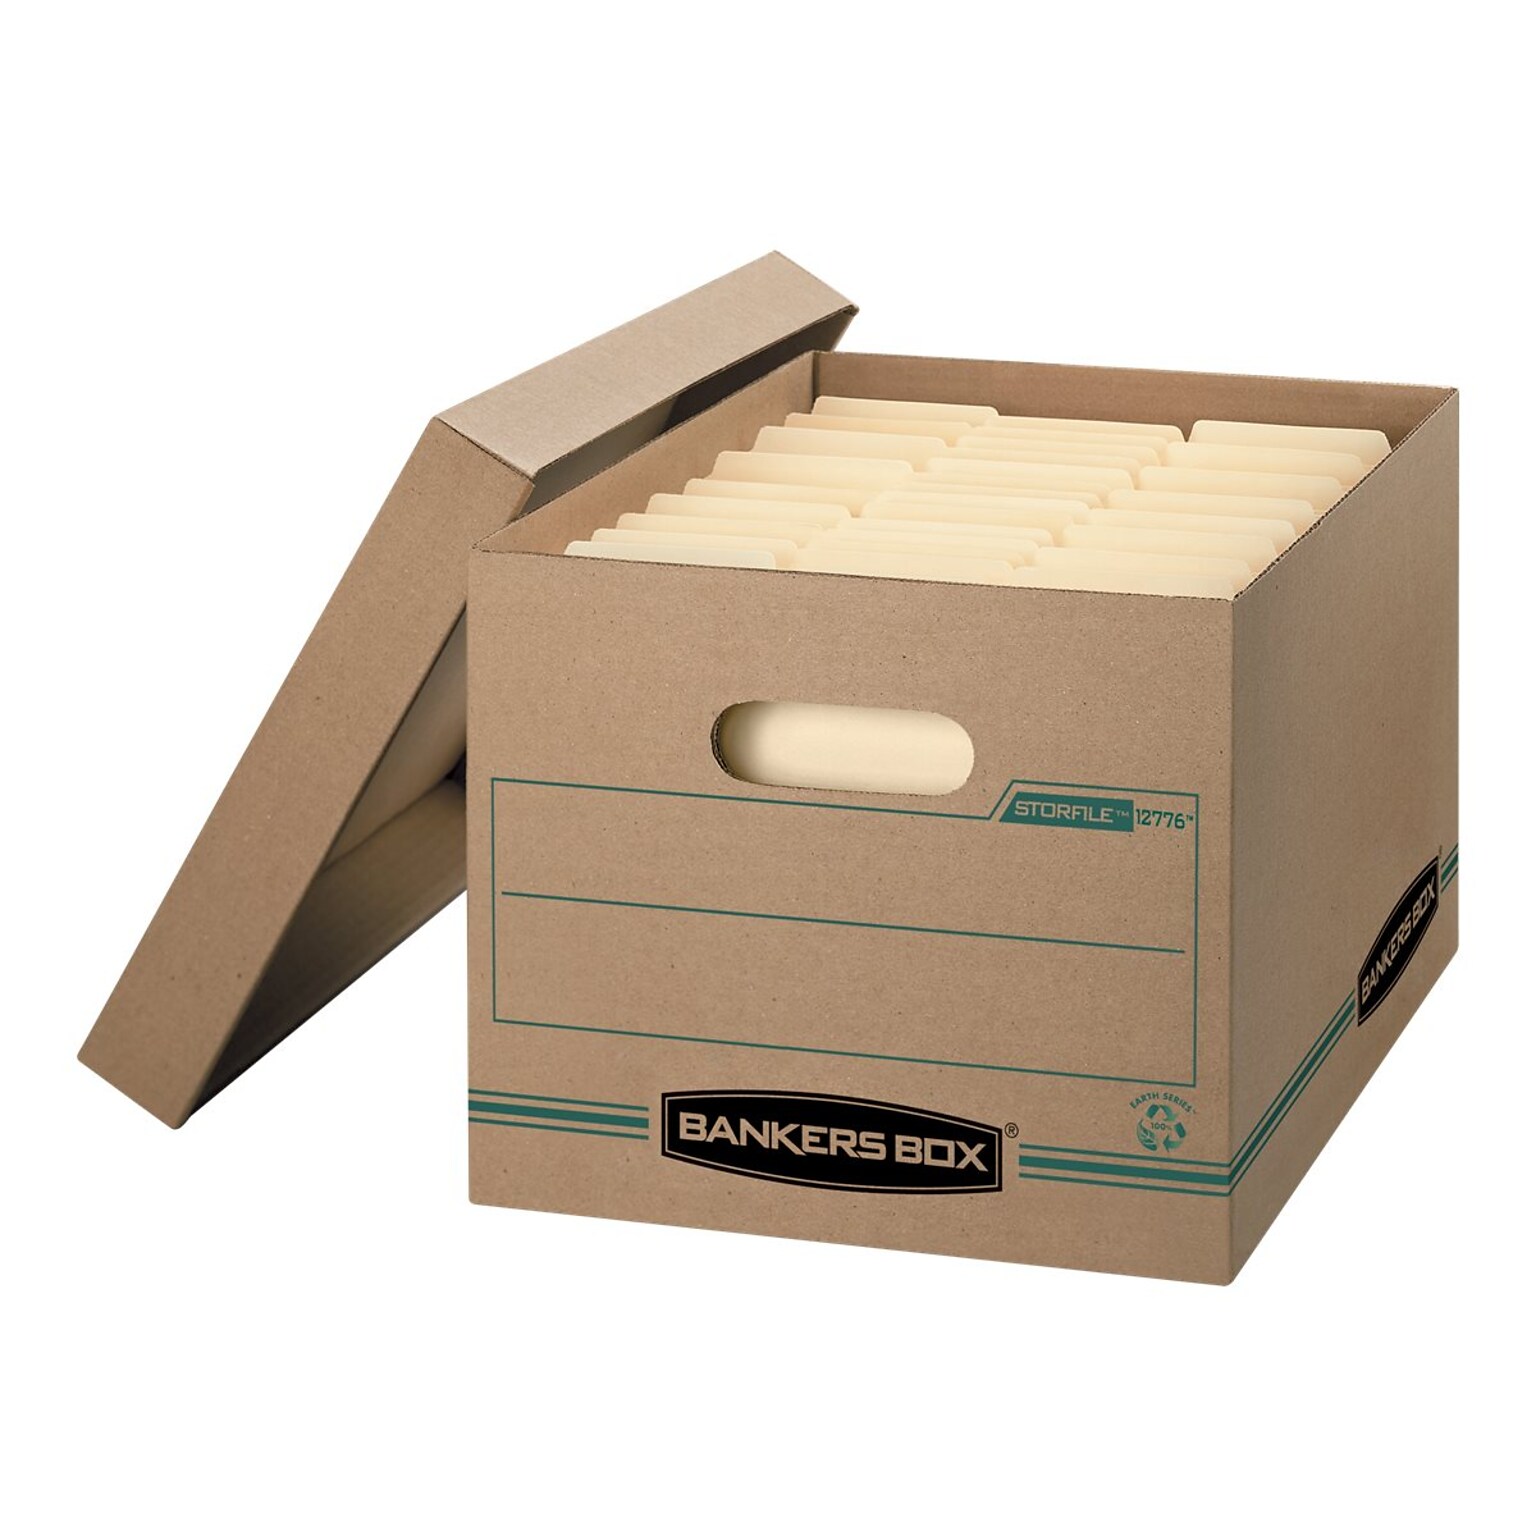 Bankers Box Stor/File 100% Recycled Corrugated File Storages Boxes, Lift-Off Lid, Letter/Legal Size, Brown, 12/Carton (1277601)